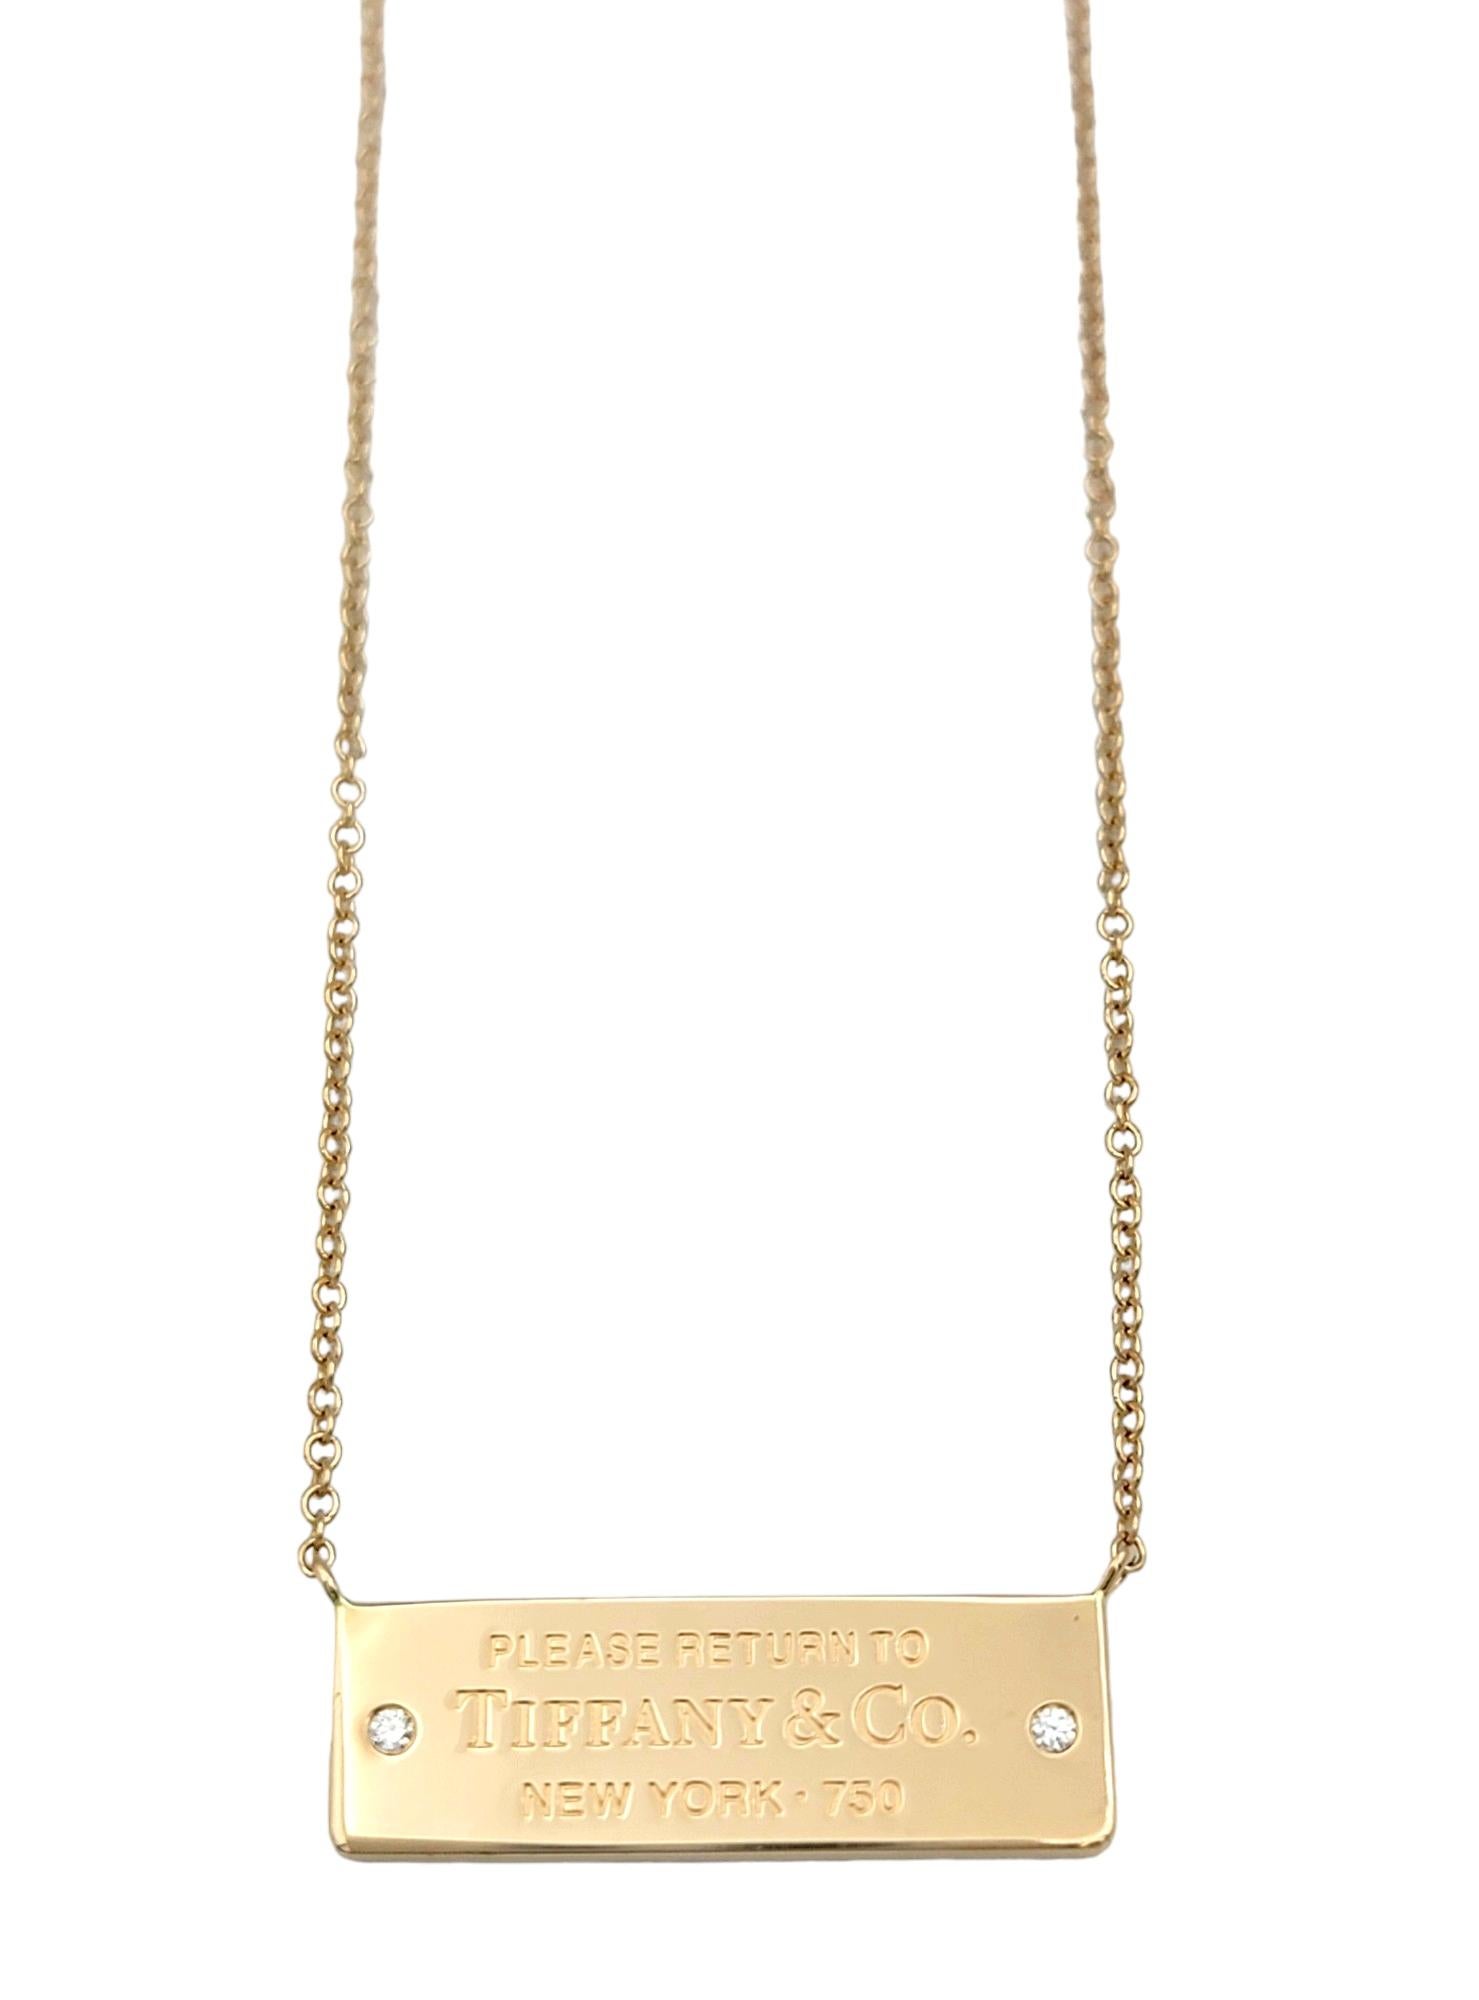 This gorgeous Tiffany & Co. bar necklace in 18 karat rose gold from the 'Return to Tiffany' Collection is a timeless piece of jewelry that exudes elegance and sophistication. The delicate rose gold bar pendant is engraved with the iconic inscription